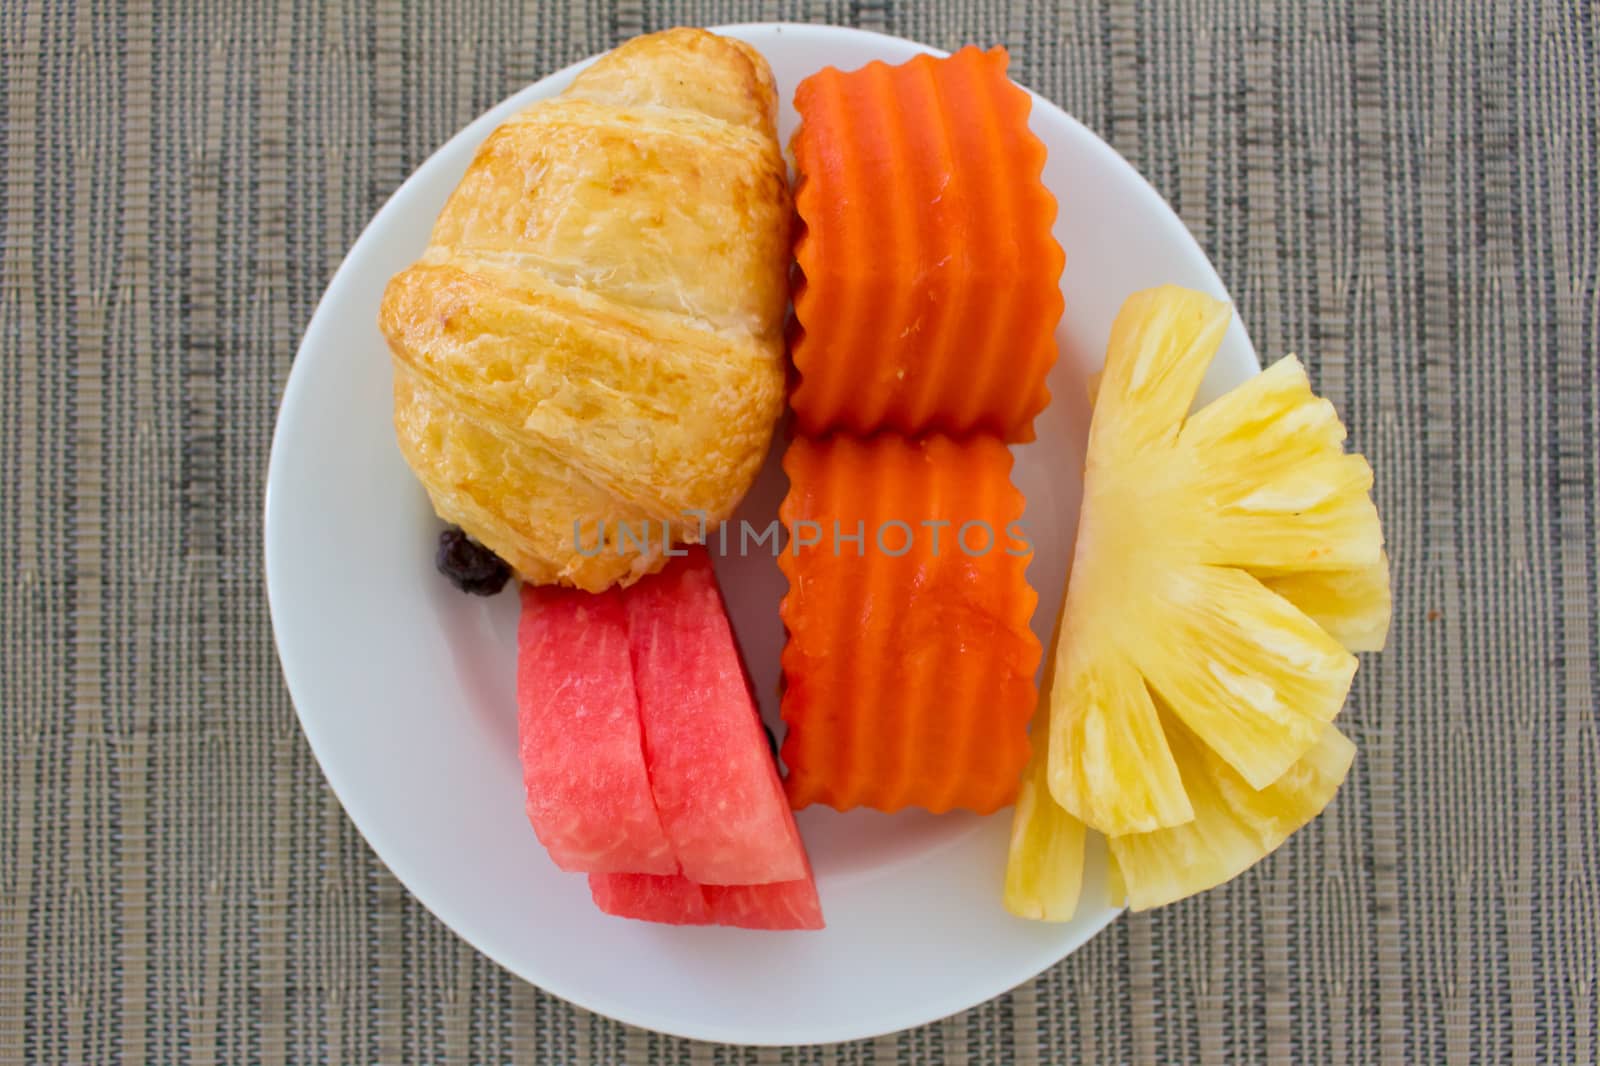 Breakfast with fruits and a piece of bread on the white plate, top view